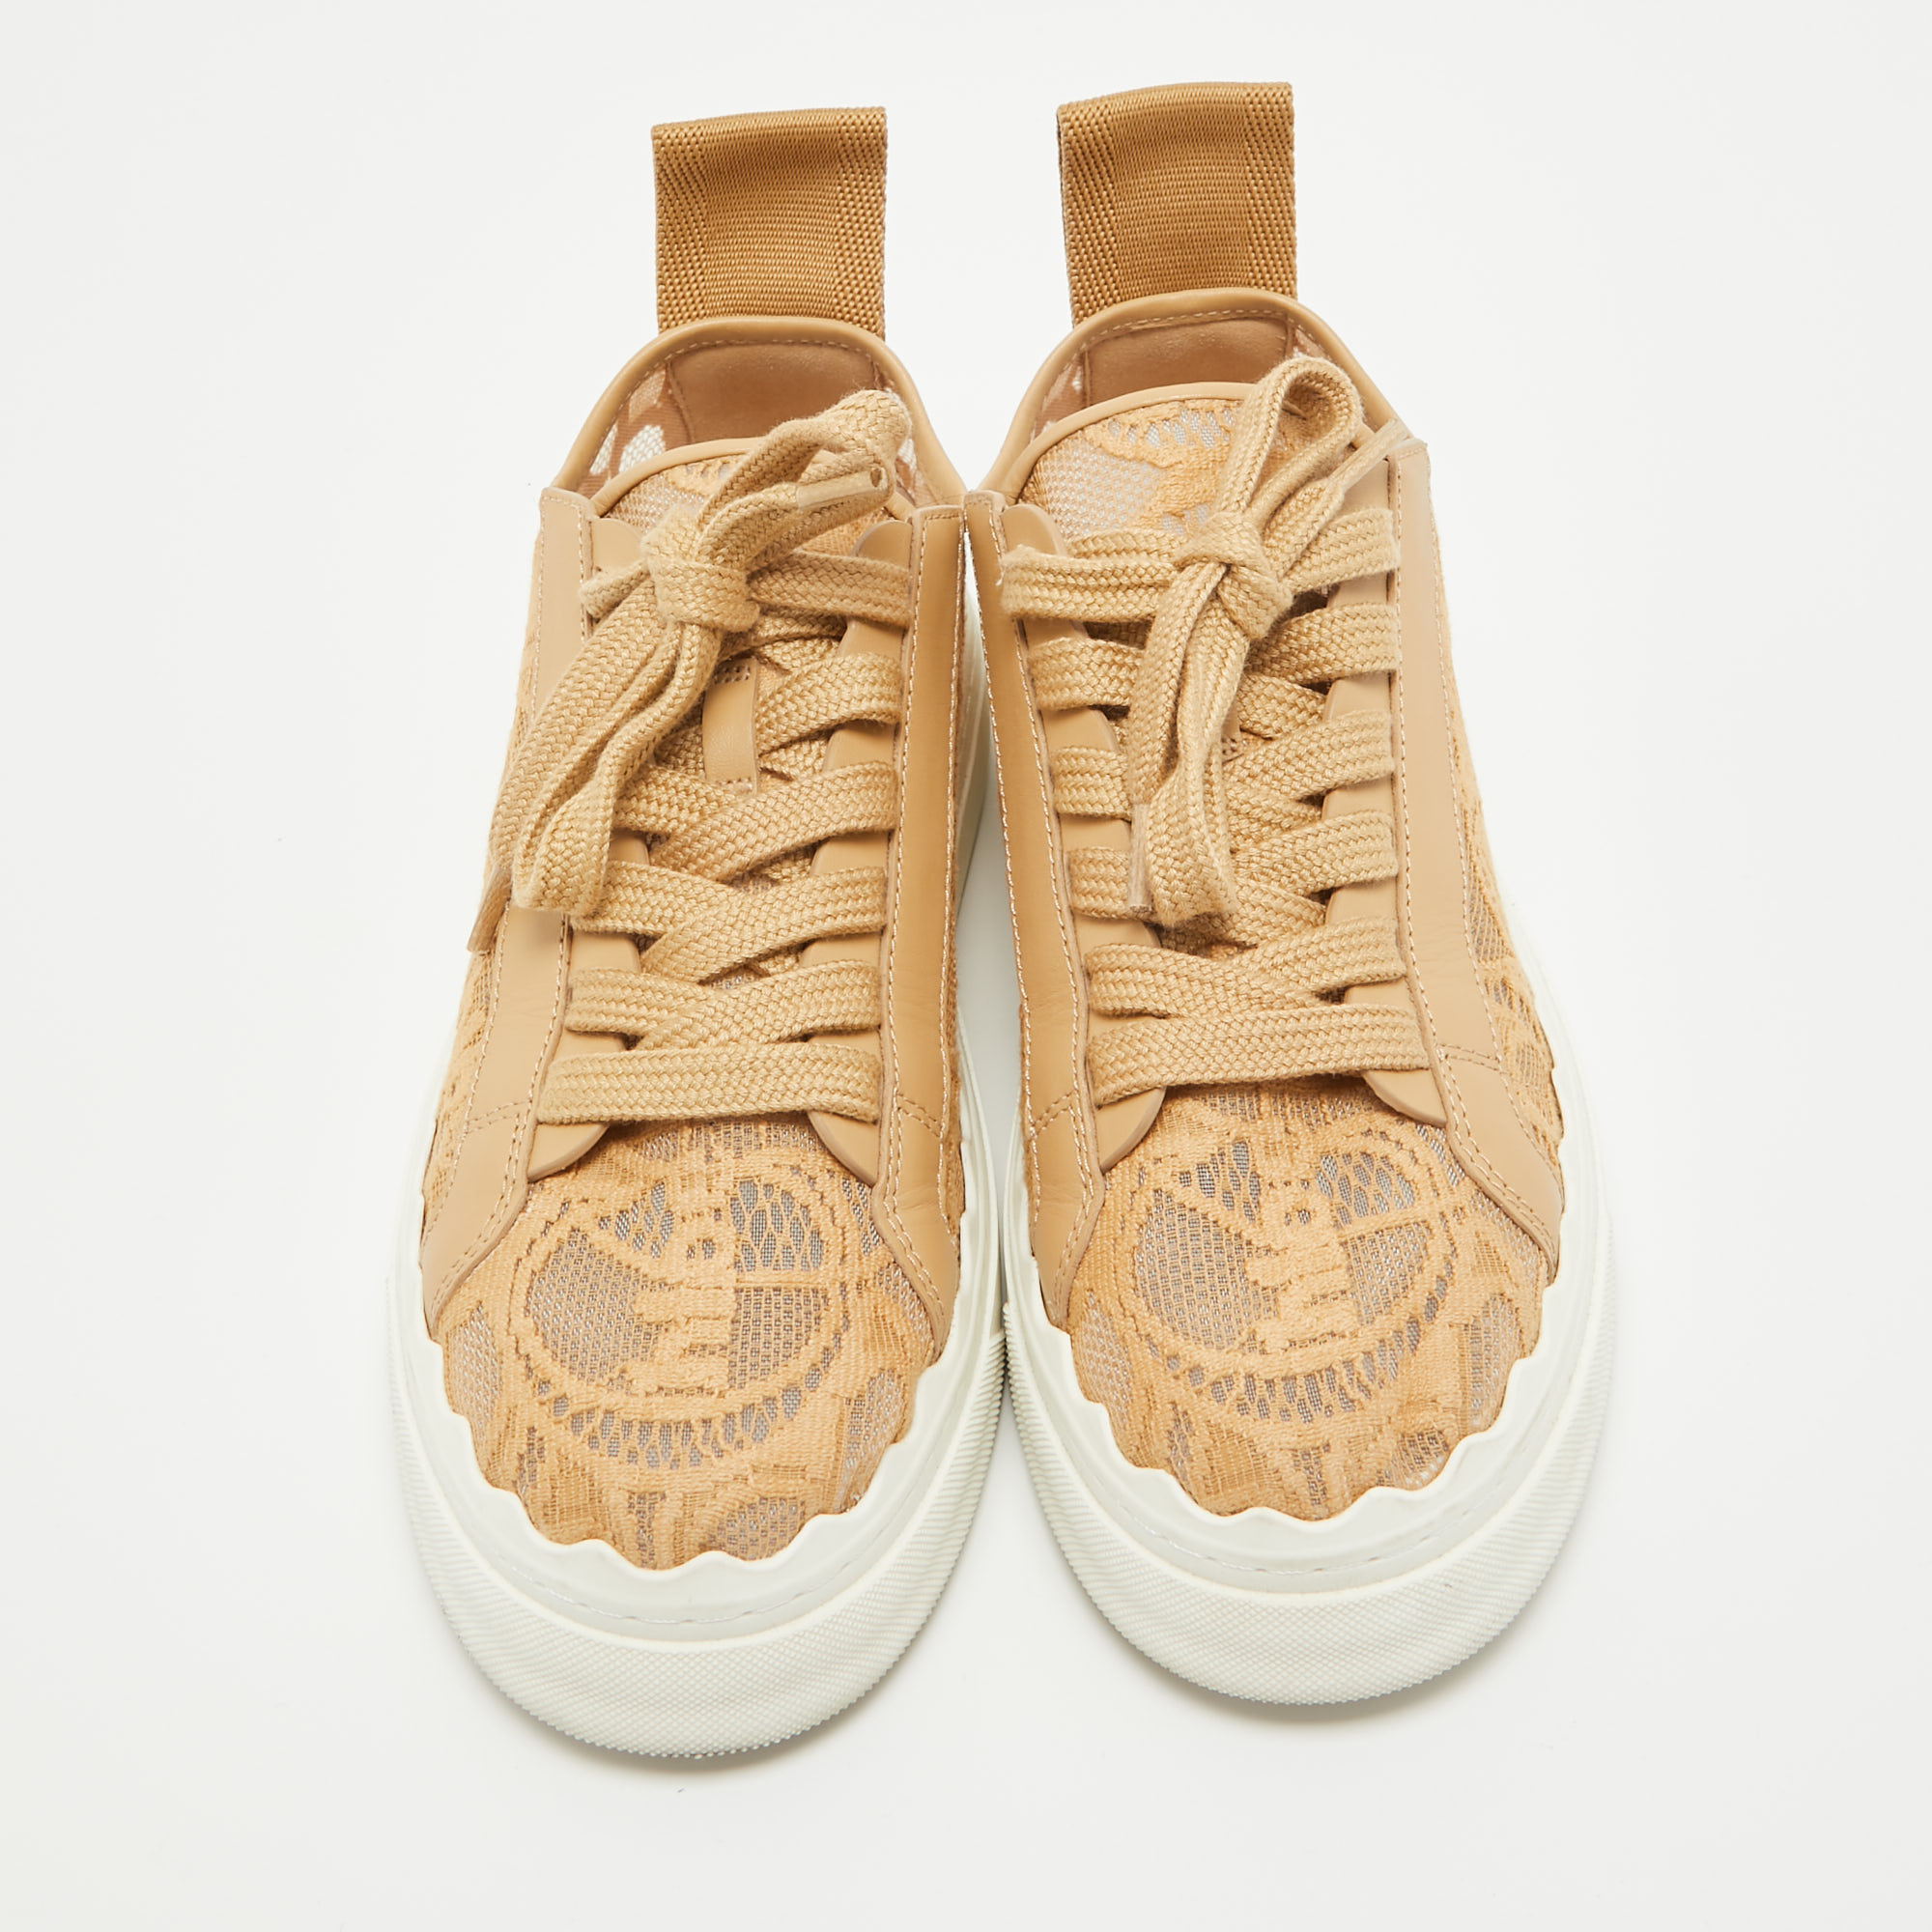 Chloe Beige Mesh And Leather Lauren Lace Up Sneakers Size 36